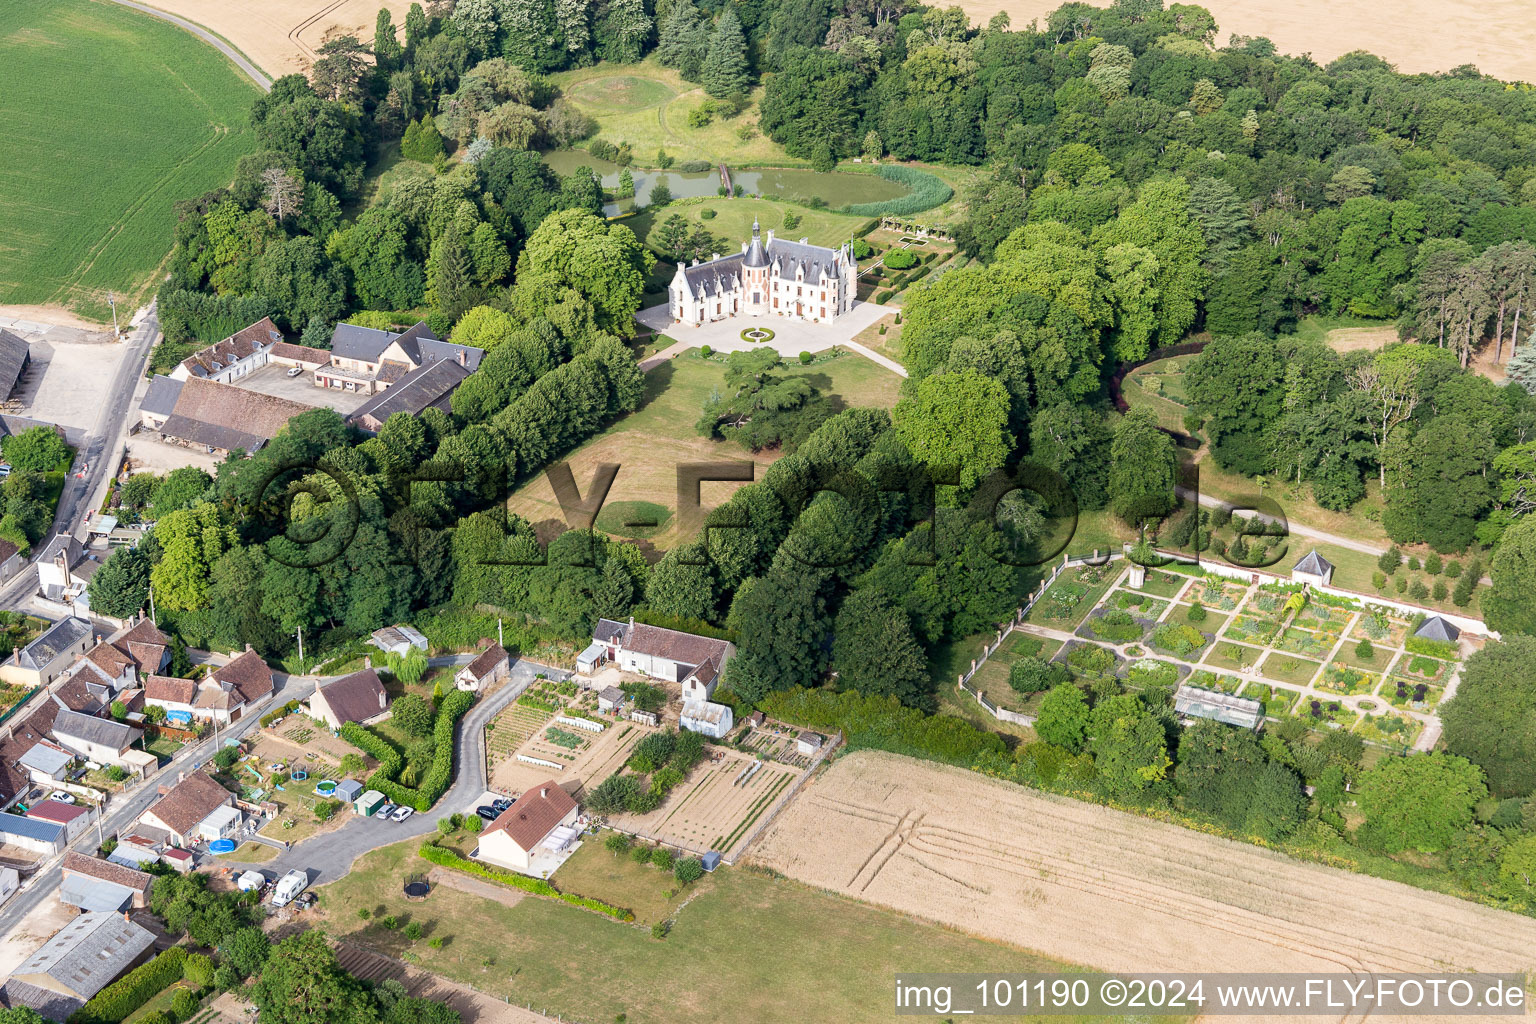 Buildings and park of the castle in Saint-Cyr-du-Gault in Centre-Val de Loire, France out of the air